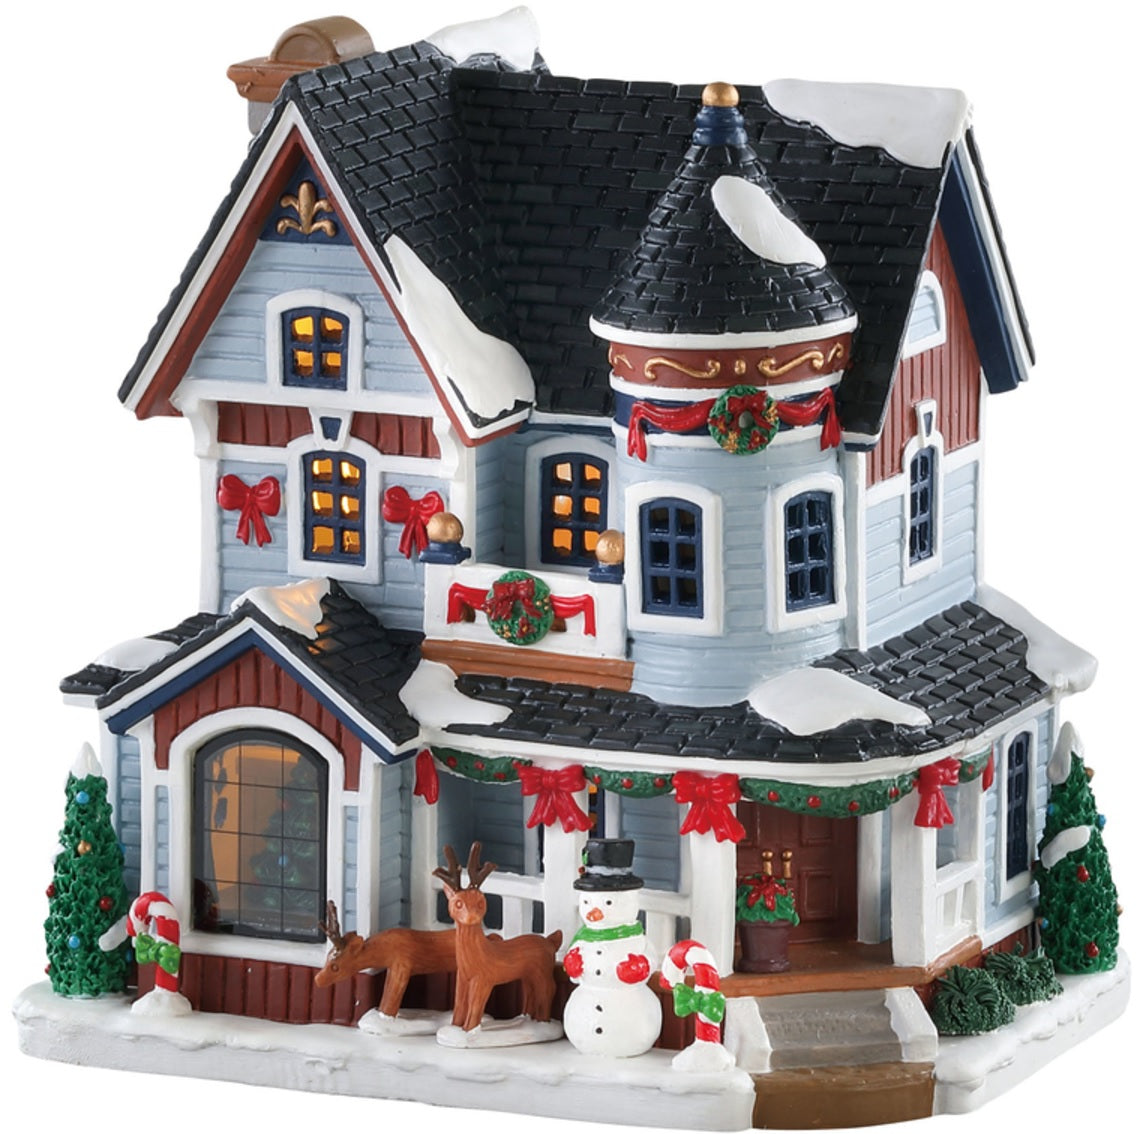 Lemax 85389 Christmas Residence Village Building, Multicolored